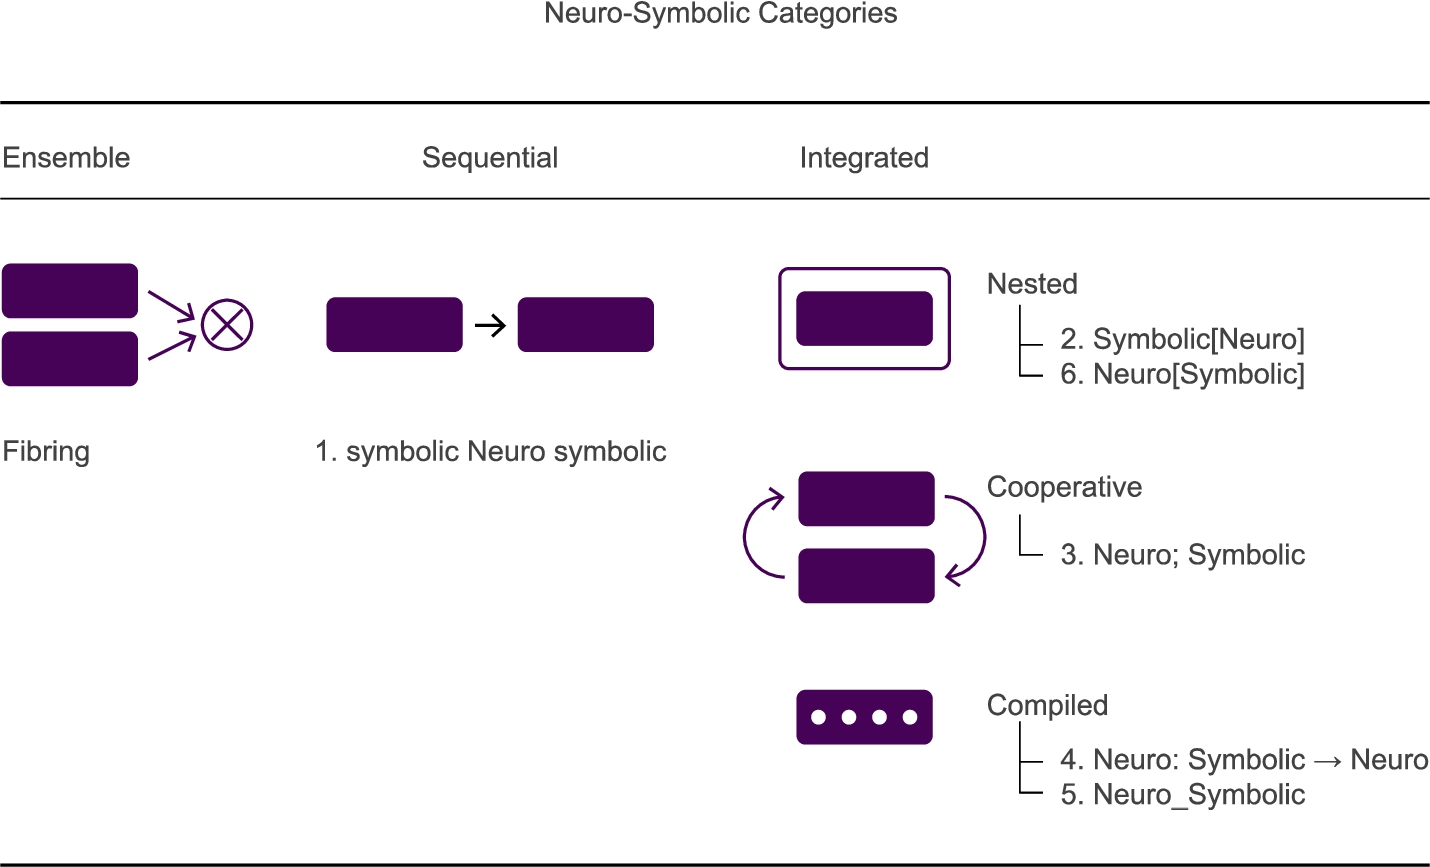 Proposed neuro-symbolic artificial intelligence categories. Adapted from Henry Kautz.